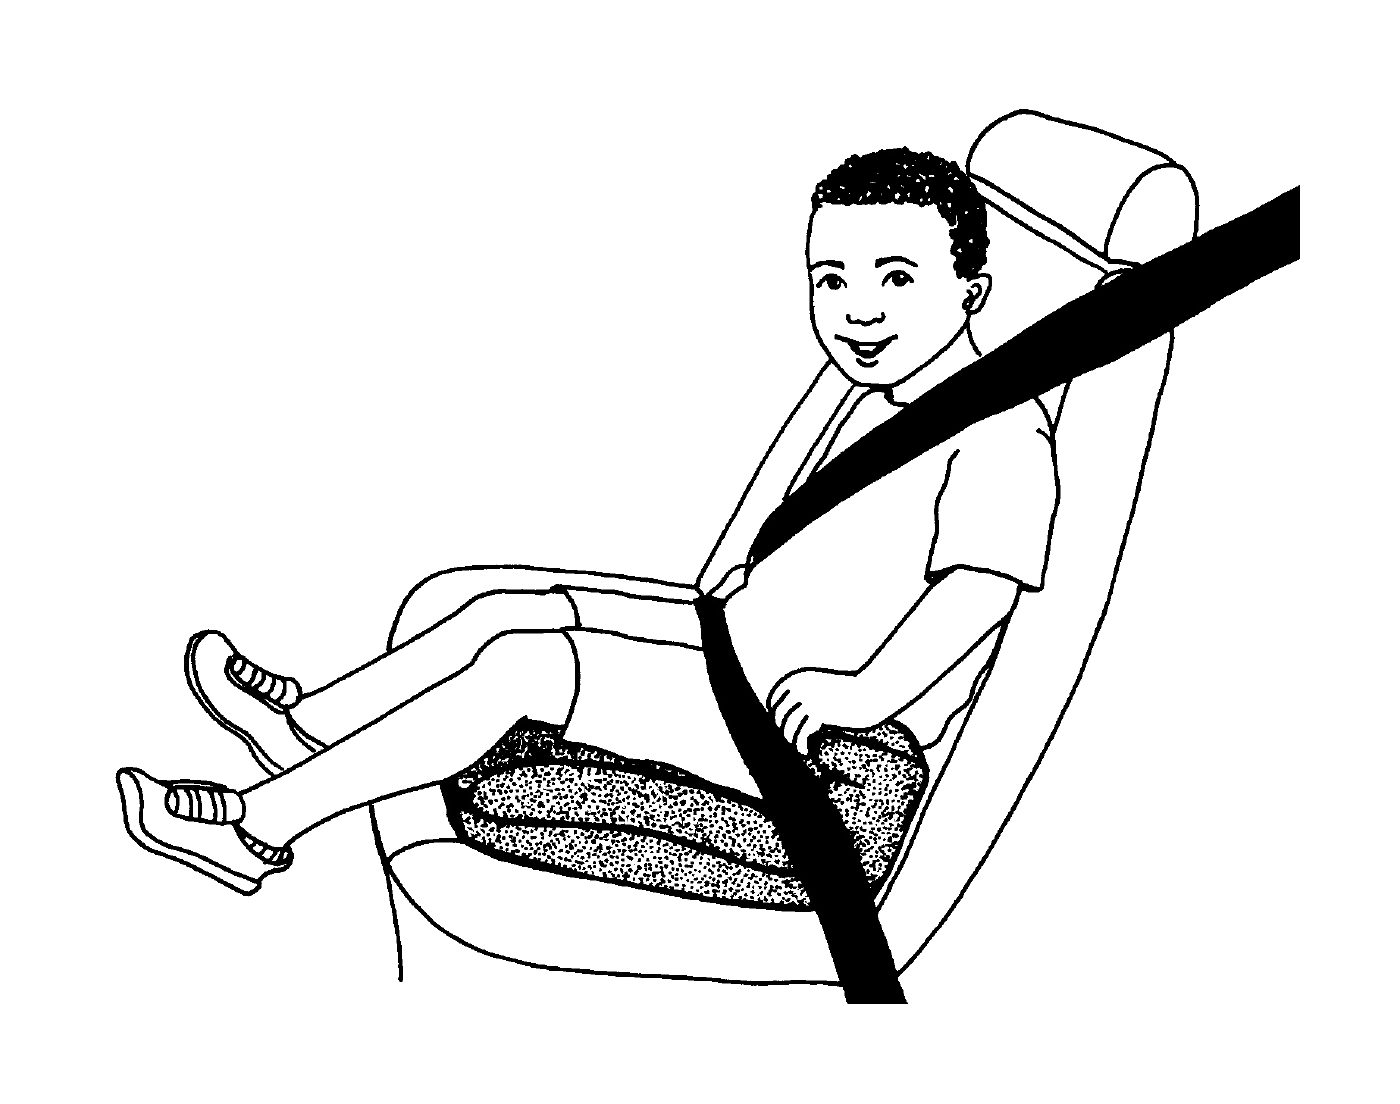  A child is seated in a car seat 